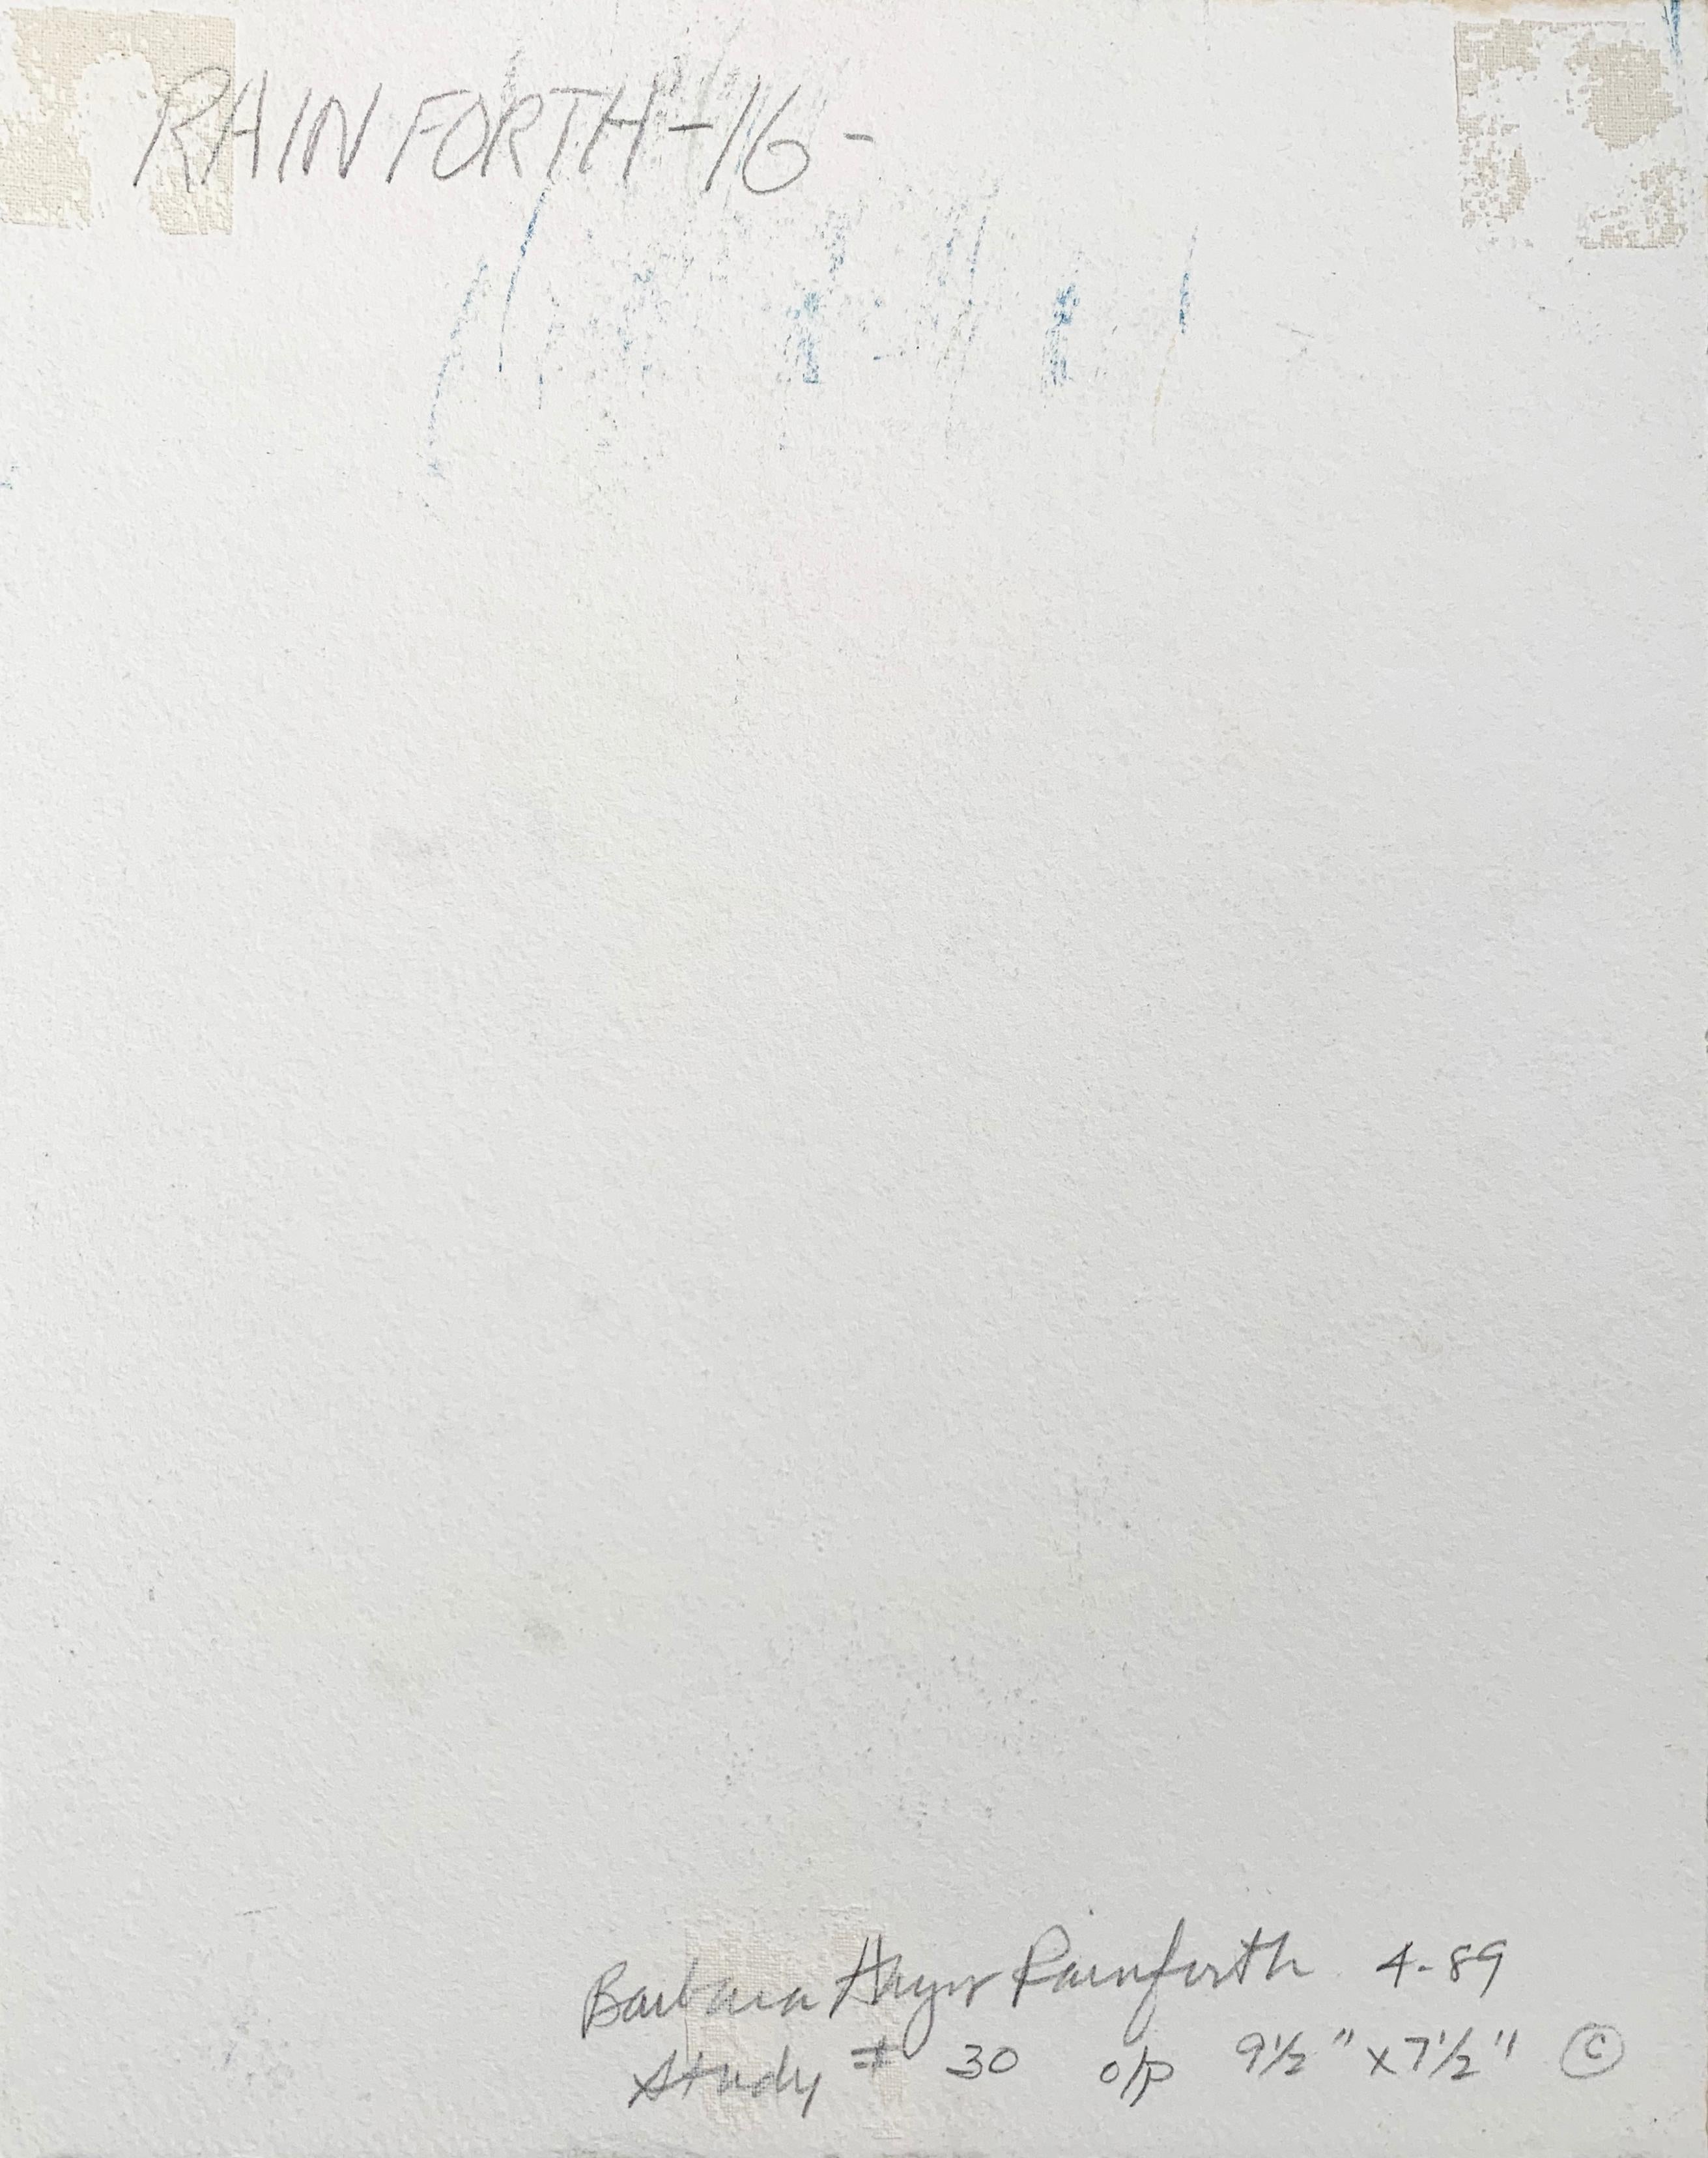 Initialed lower right in pencil, 'B.R.' for Barbara Rainforth (American, 20th century) and dated 1989. Additionally signed in pencil, verso, 'Barbara Hayer Rainforth', dated '4/89' and titled, 'Study #30'. 

Barbara Rainforth received her BA from